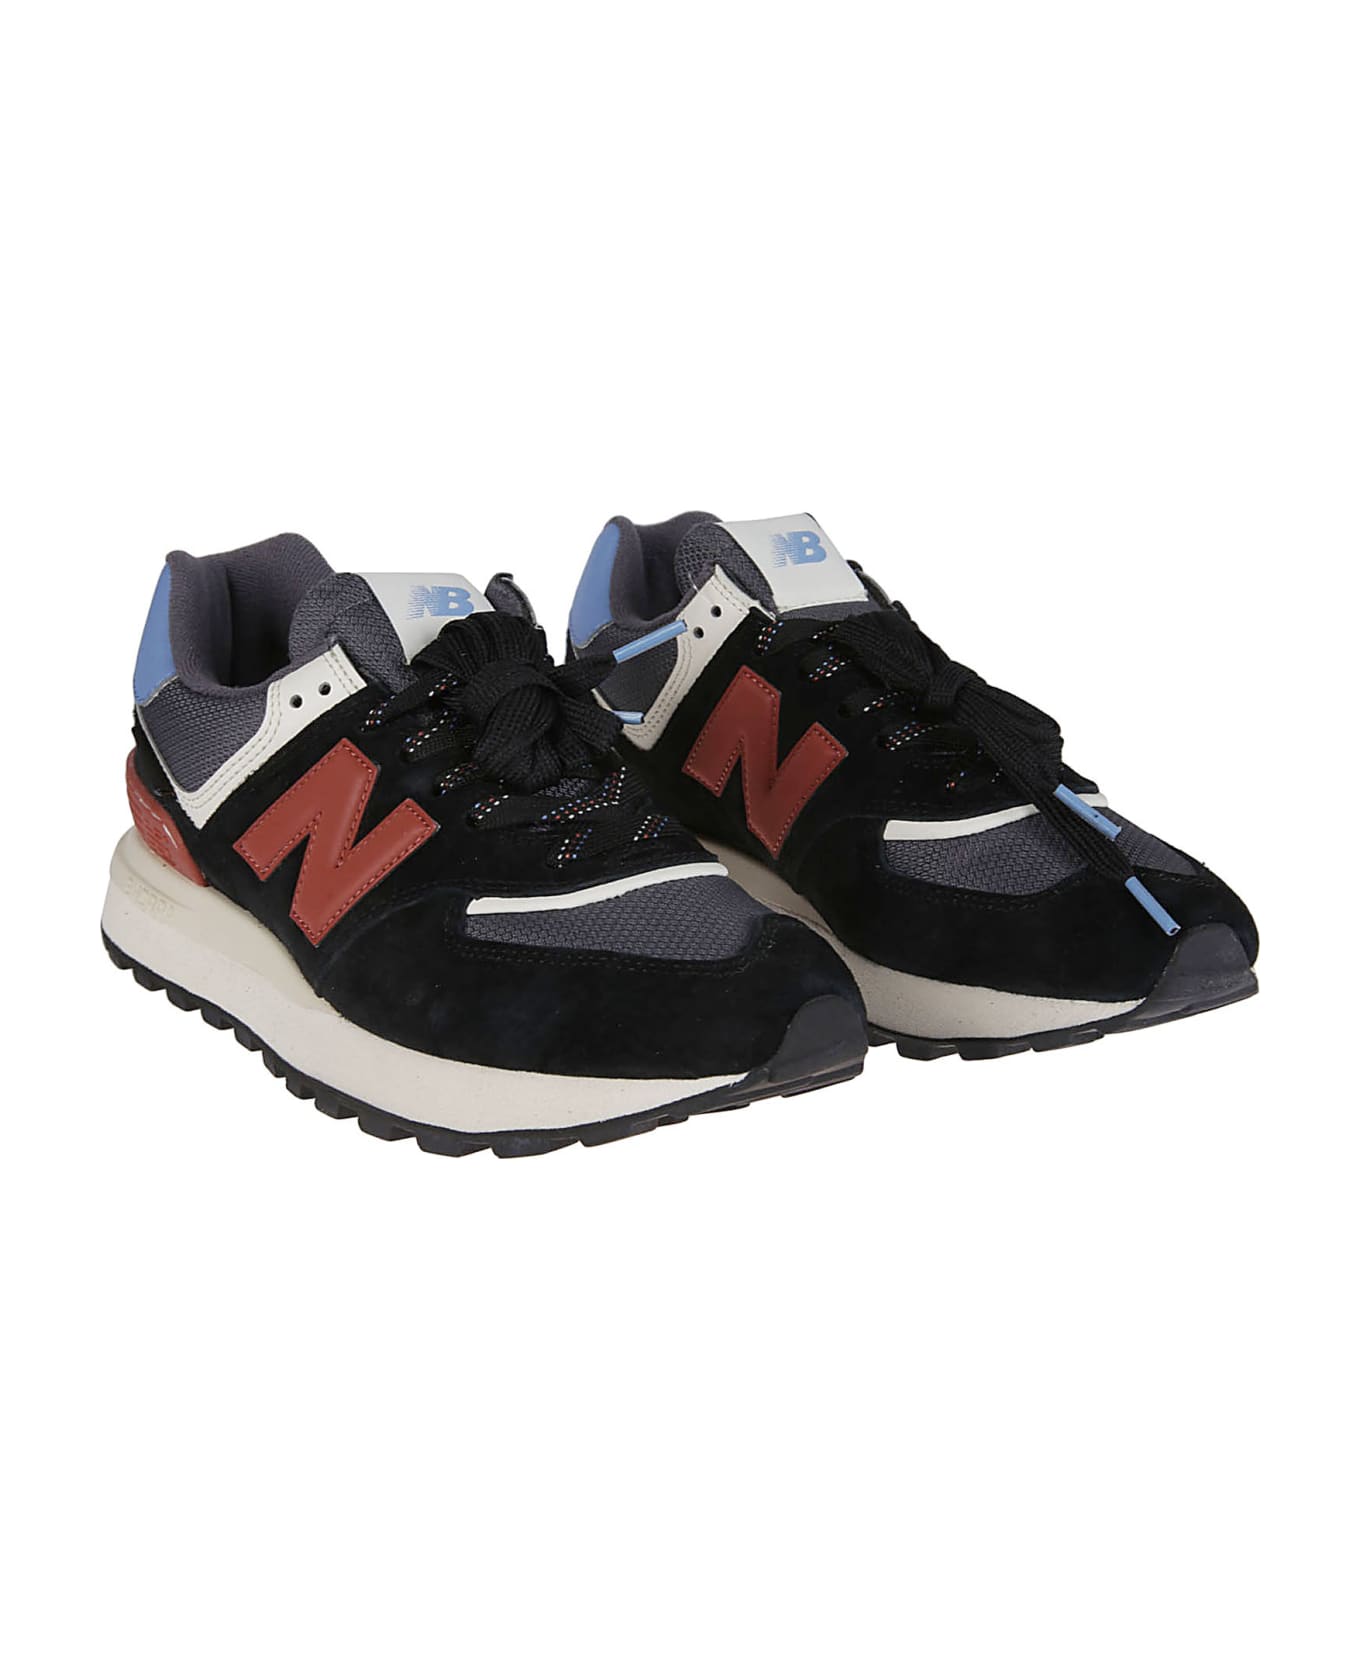 New Balance 574 Sneakers - MULTICOLOR